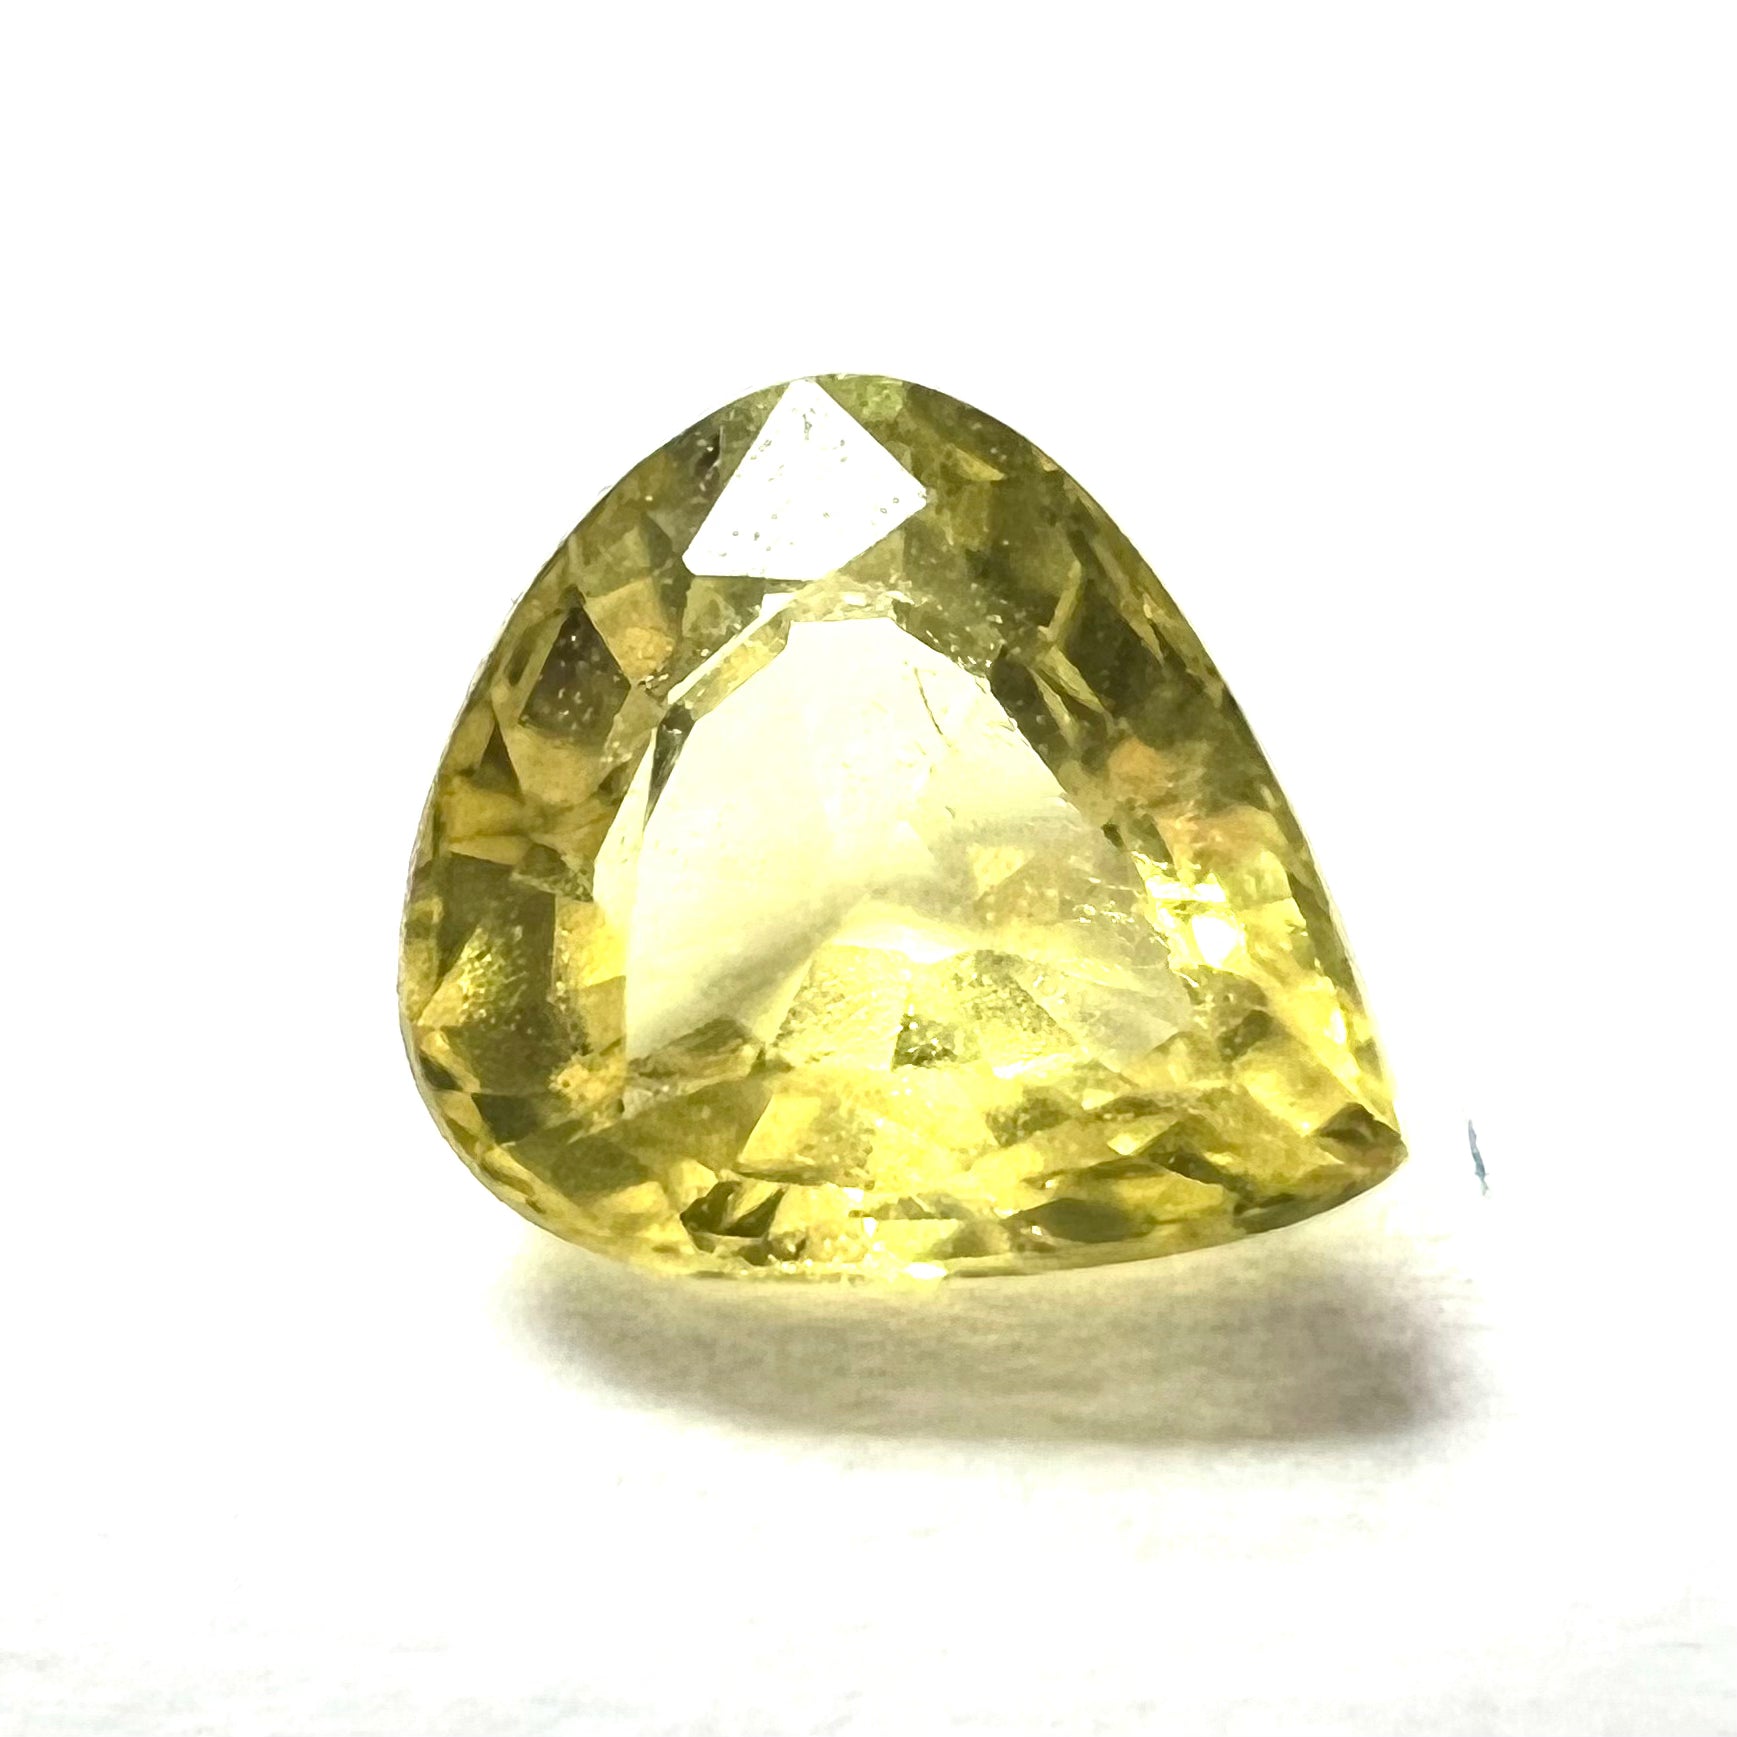 .50CT Loose Pear Yellow Sapphire 6.01x5.03x3.01mm Earth mined Gemstone